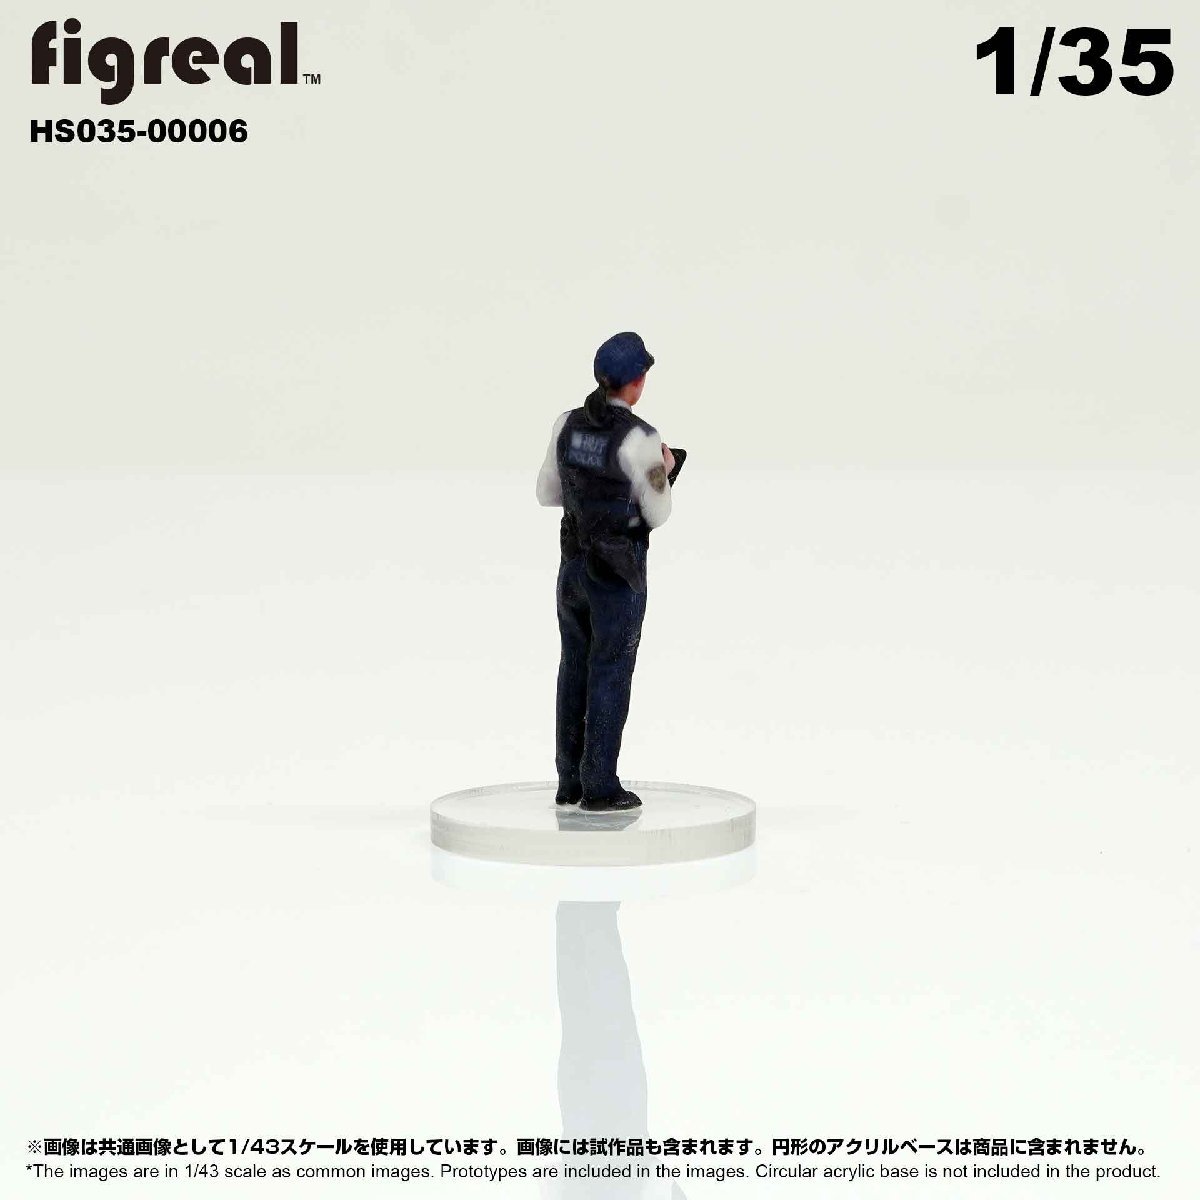 HS035-00006 figreal 日本警察官 1/35 高精細フィギュア_画像5